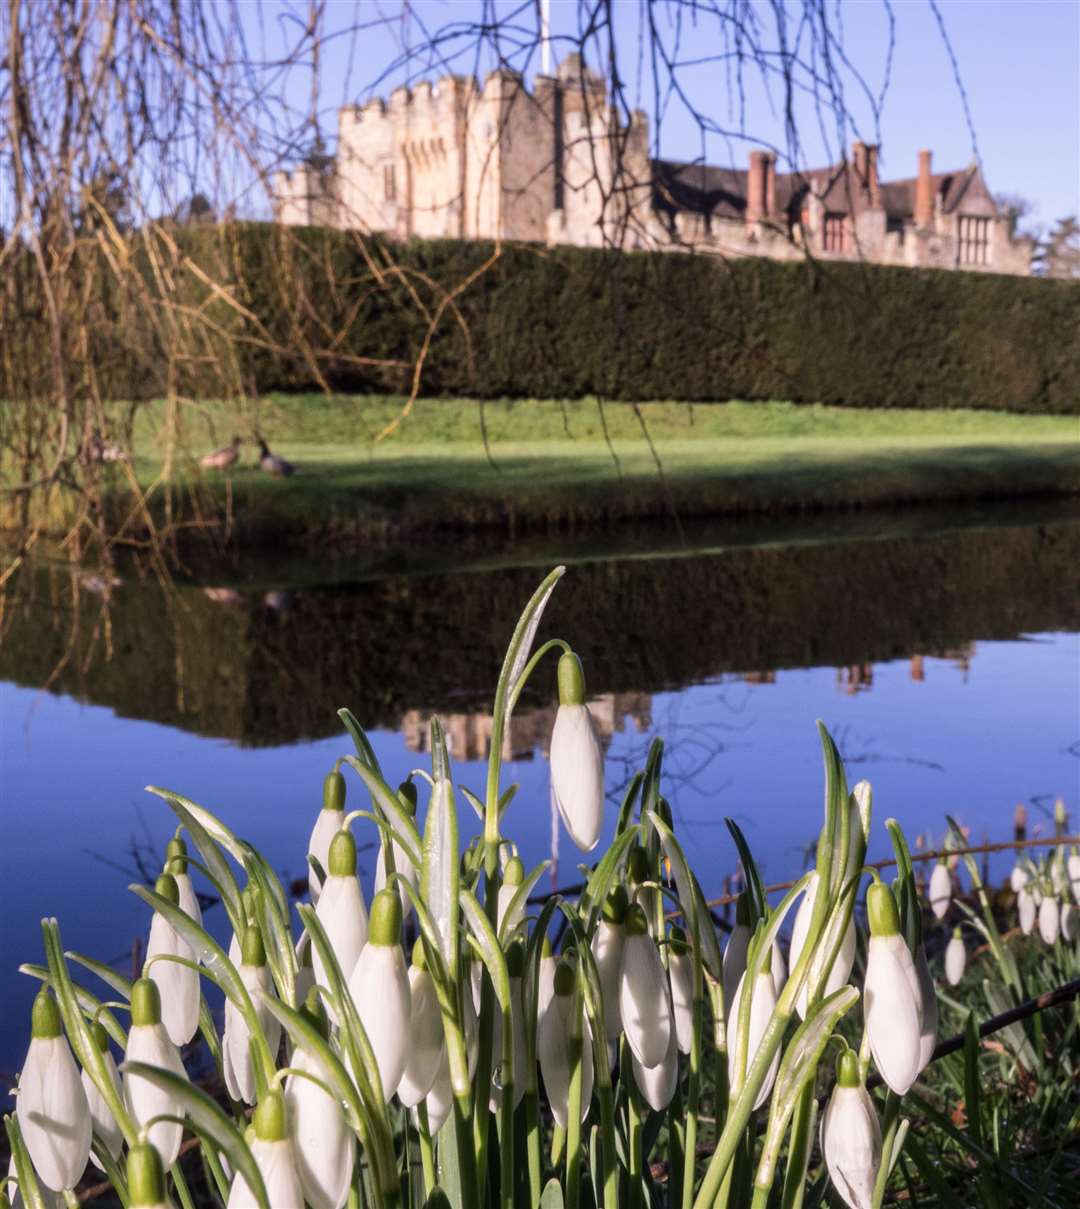 Take a self-led walk through the snowdrops at Hever Castle